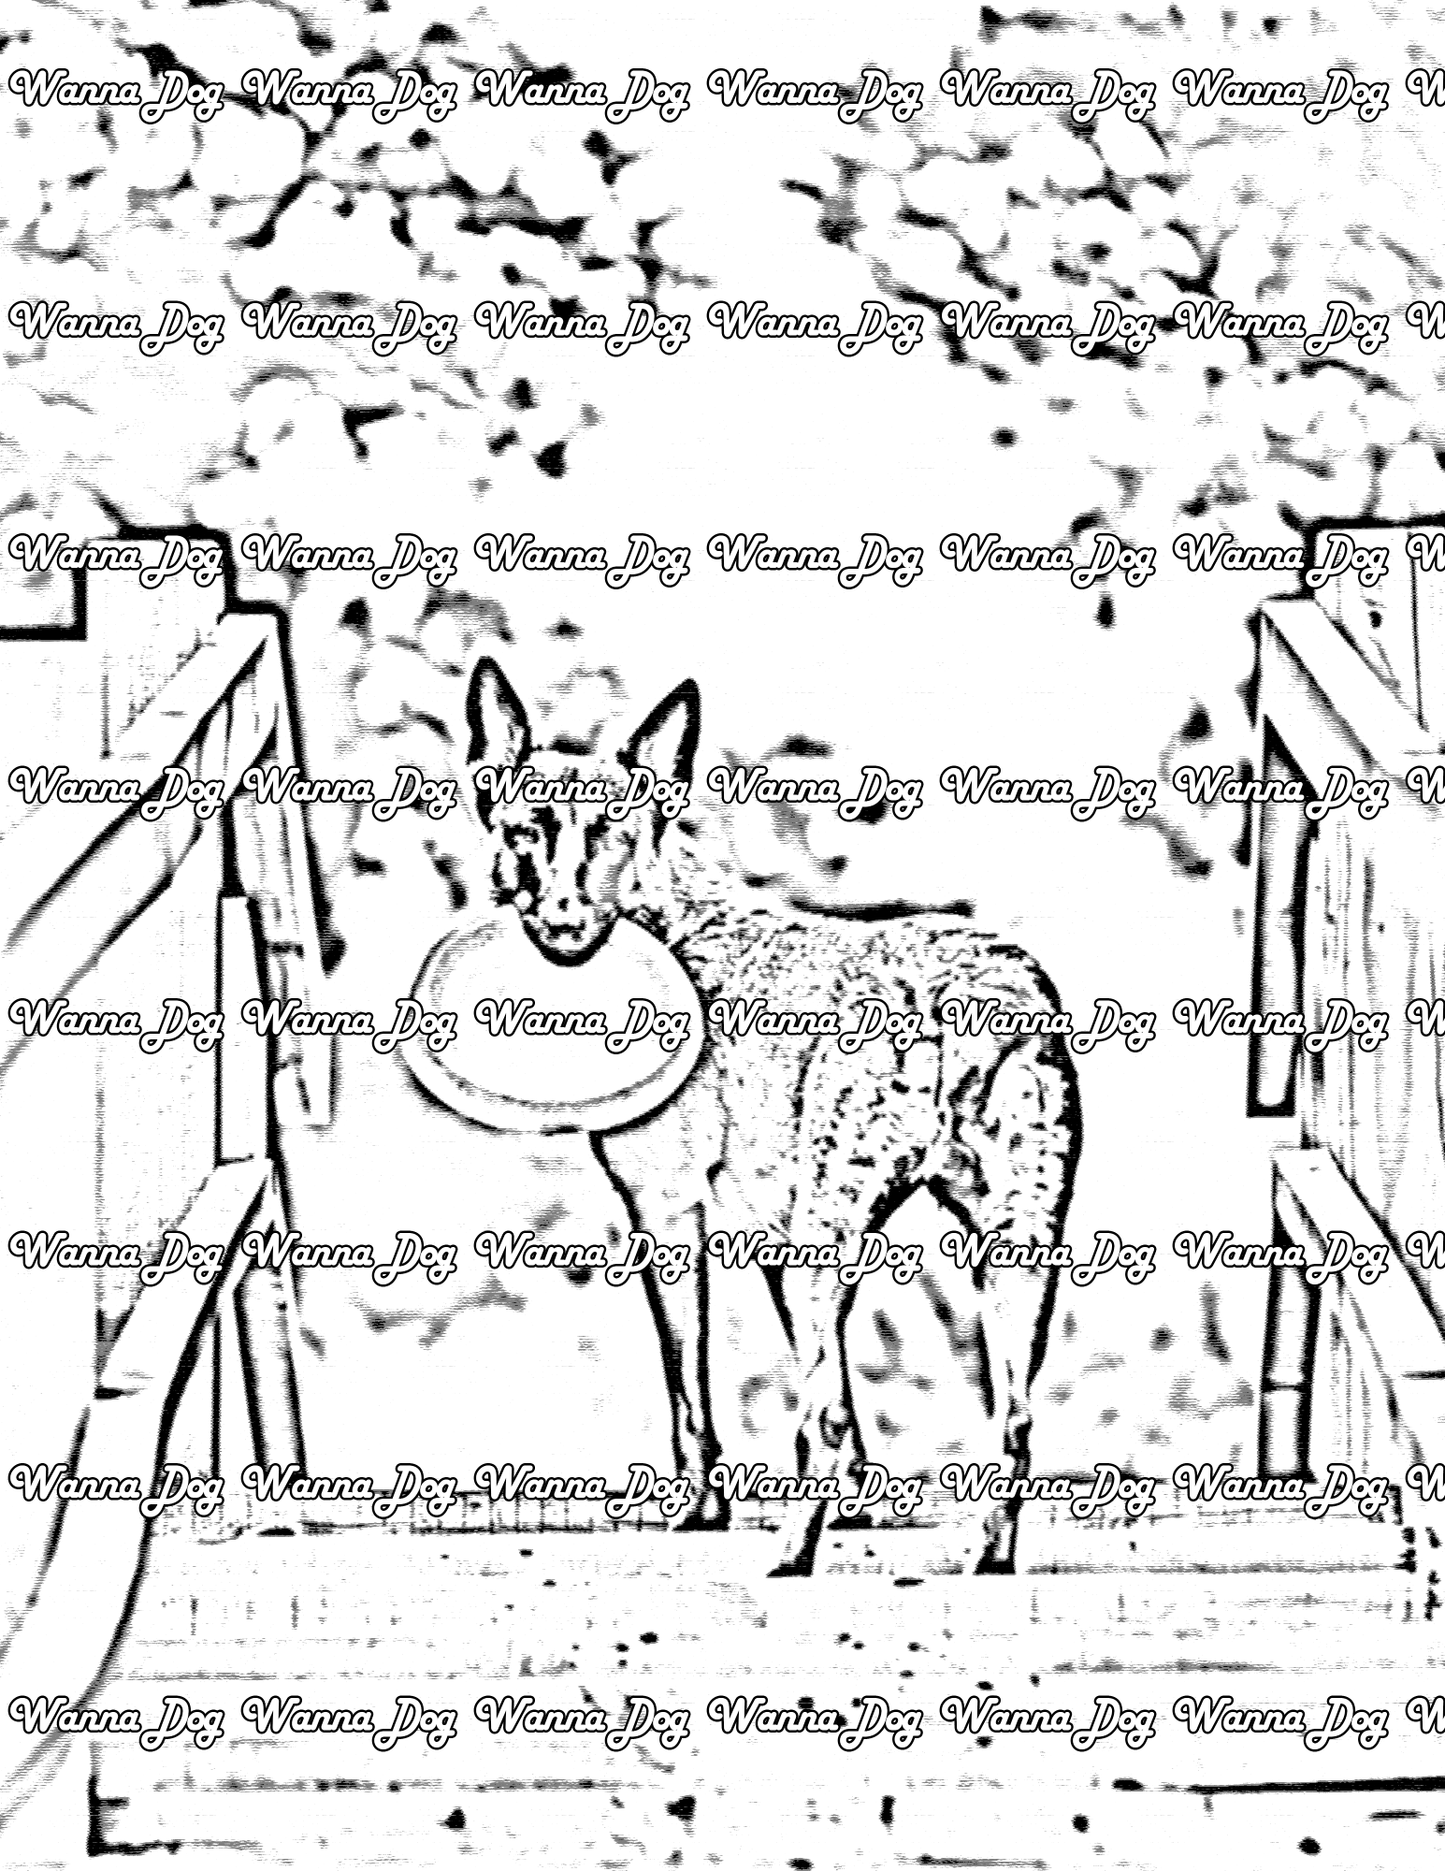 Belgian Malinois Coloring Page of a Belgian Malinois going up the steps with a frisbee